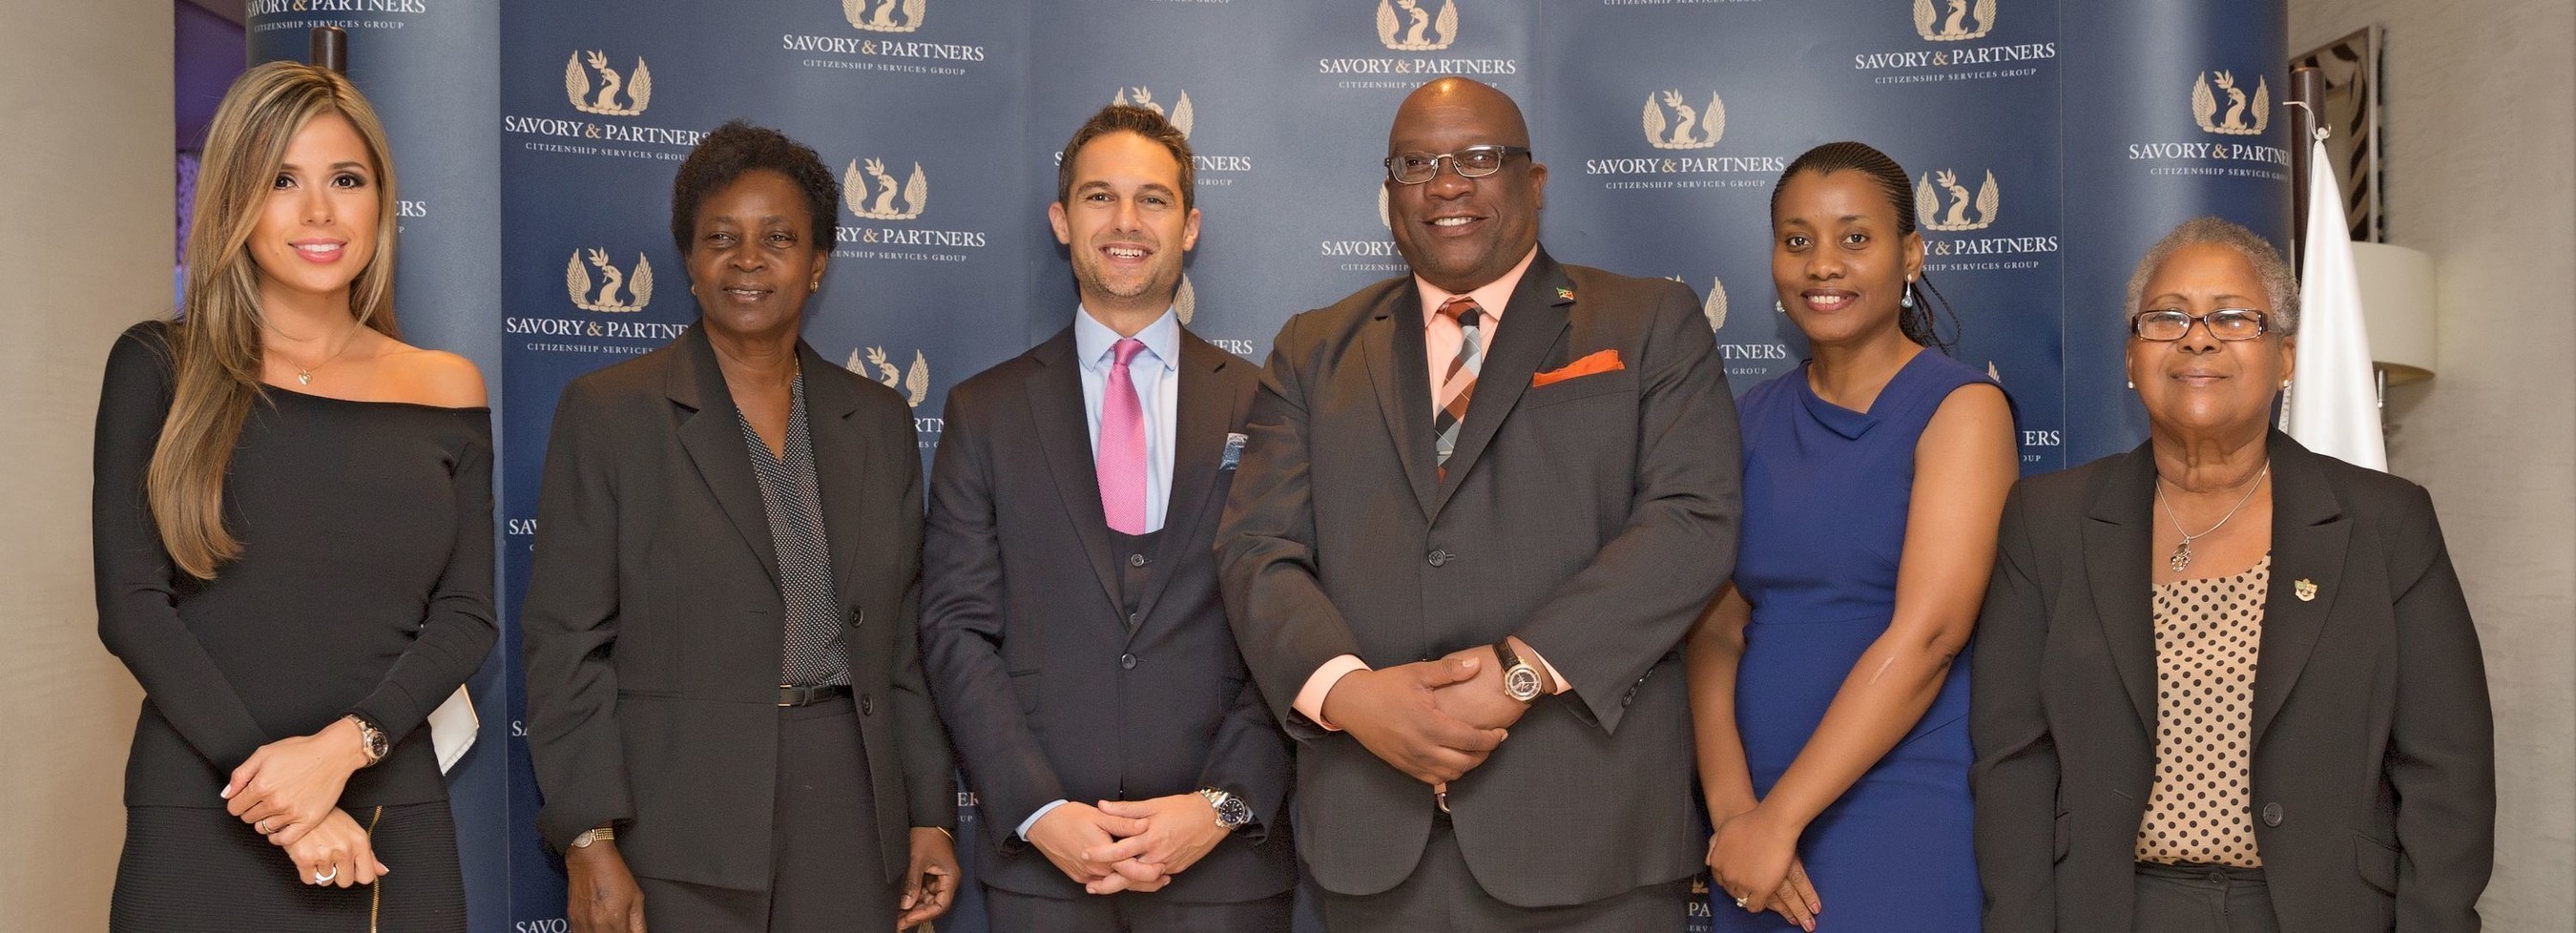 From left to right: Ms Helena Savory, Client Manager - Savory & Partners, Ambassador Constance Mitchum from St. Kitts and Nevis, Mr. Jeremy Savory, Managing Partner of Savory & Partners, Prime Minister Dr. the Honourable Timothy Harris of St. Kitts and Nevis, Ms. Elsa Wilkin-Armbrister, Deputy Consul General of the Consulate of St Kitts and Nevis in Dubai, UAE, Ms. Josephine Huggins, Cabinet Secretary of St. Kitts and Nevis. (PRNewsFoto/Savory and Partners) (PRNewsFoto/Savory and Partners)